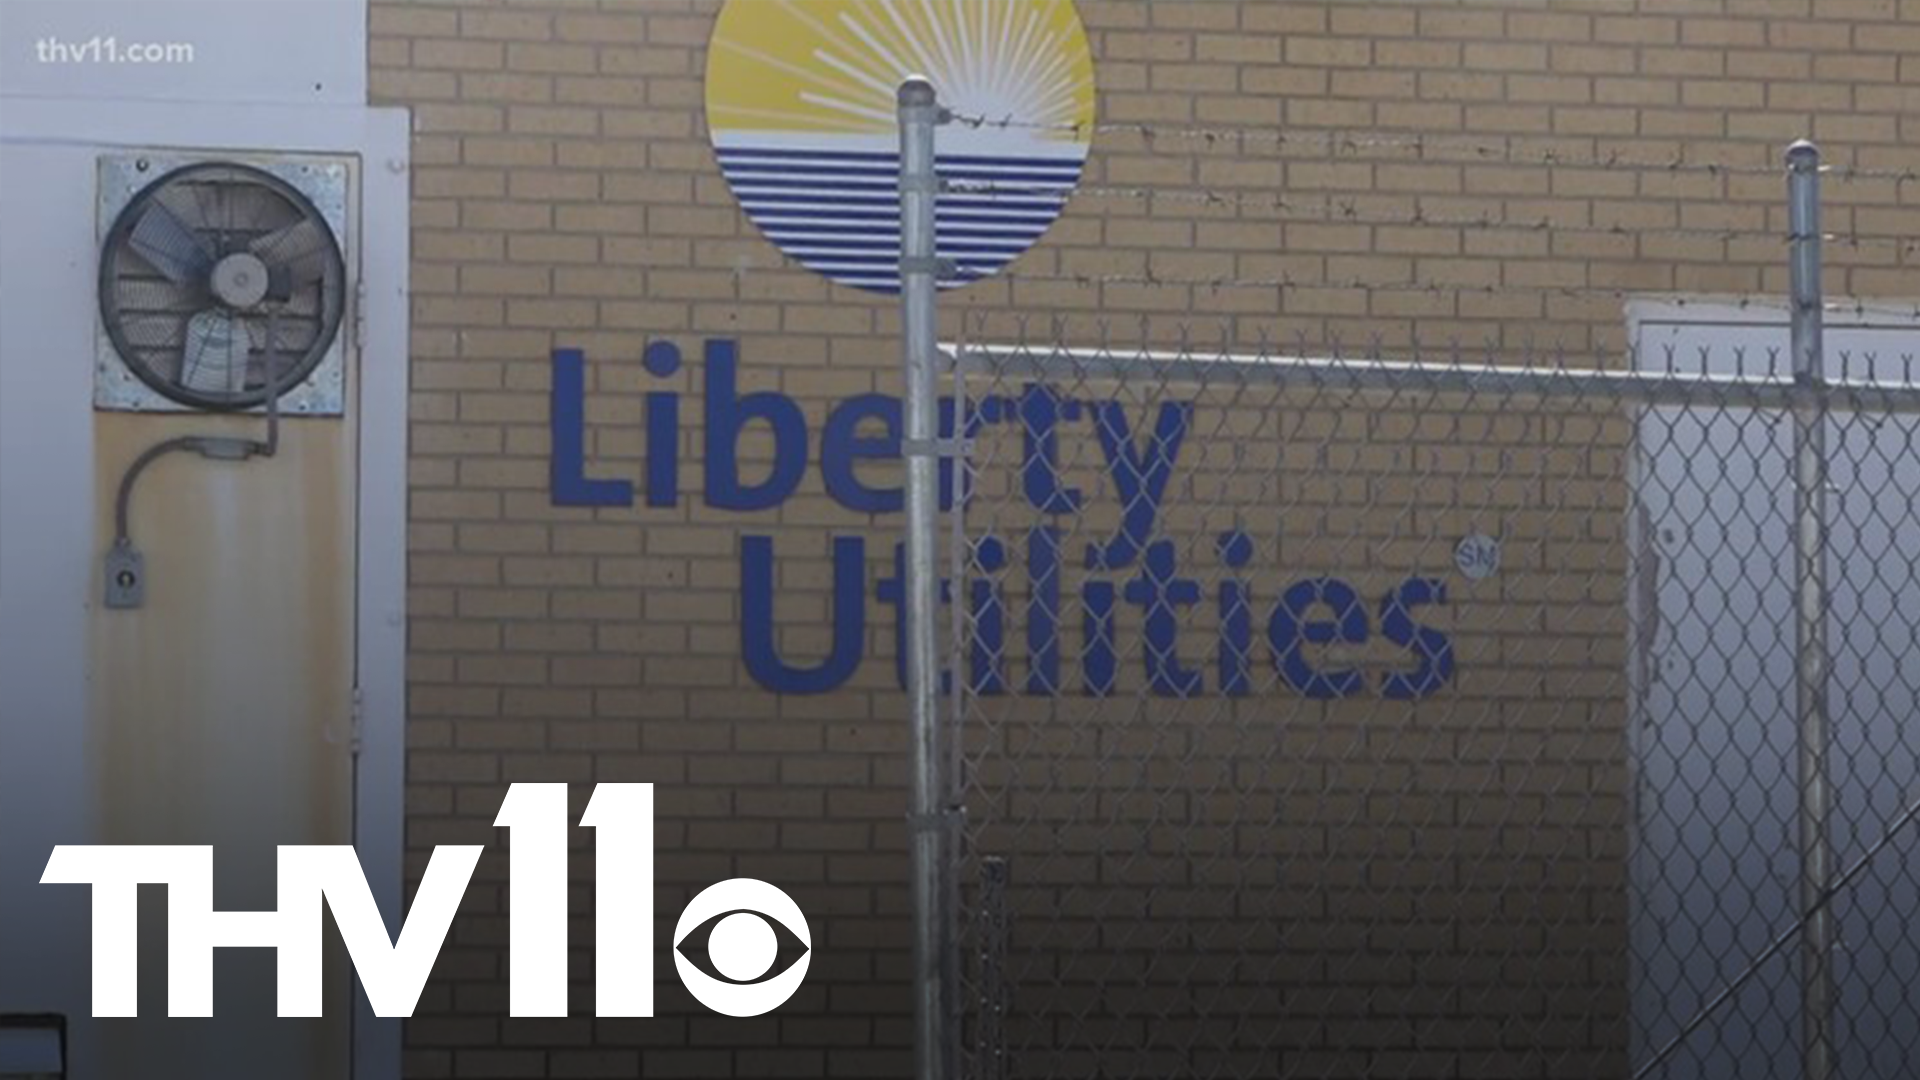 Liberty Utilities says they're happy to cooperate with the Public Service Commission, who requested the documentation on the how the water crisis was handled.